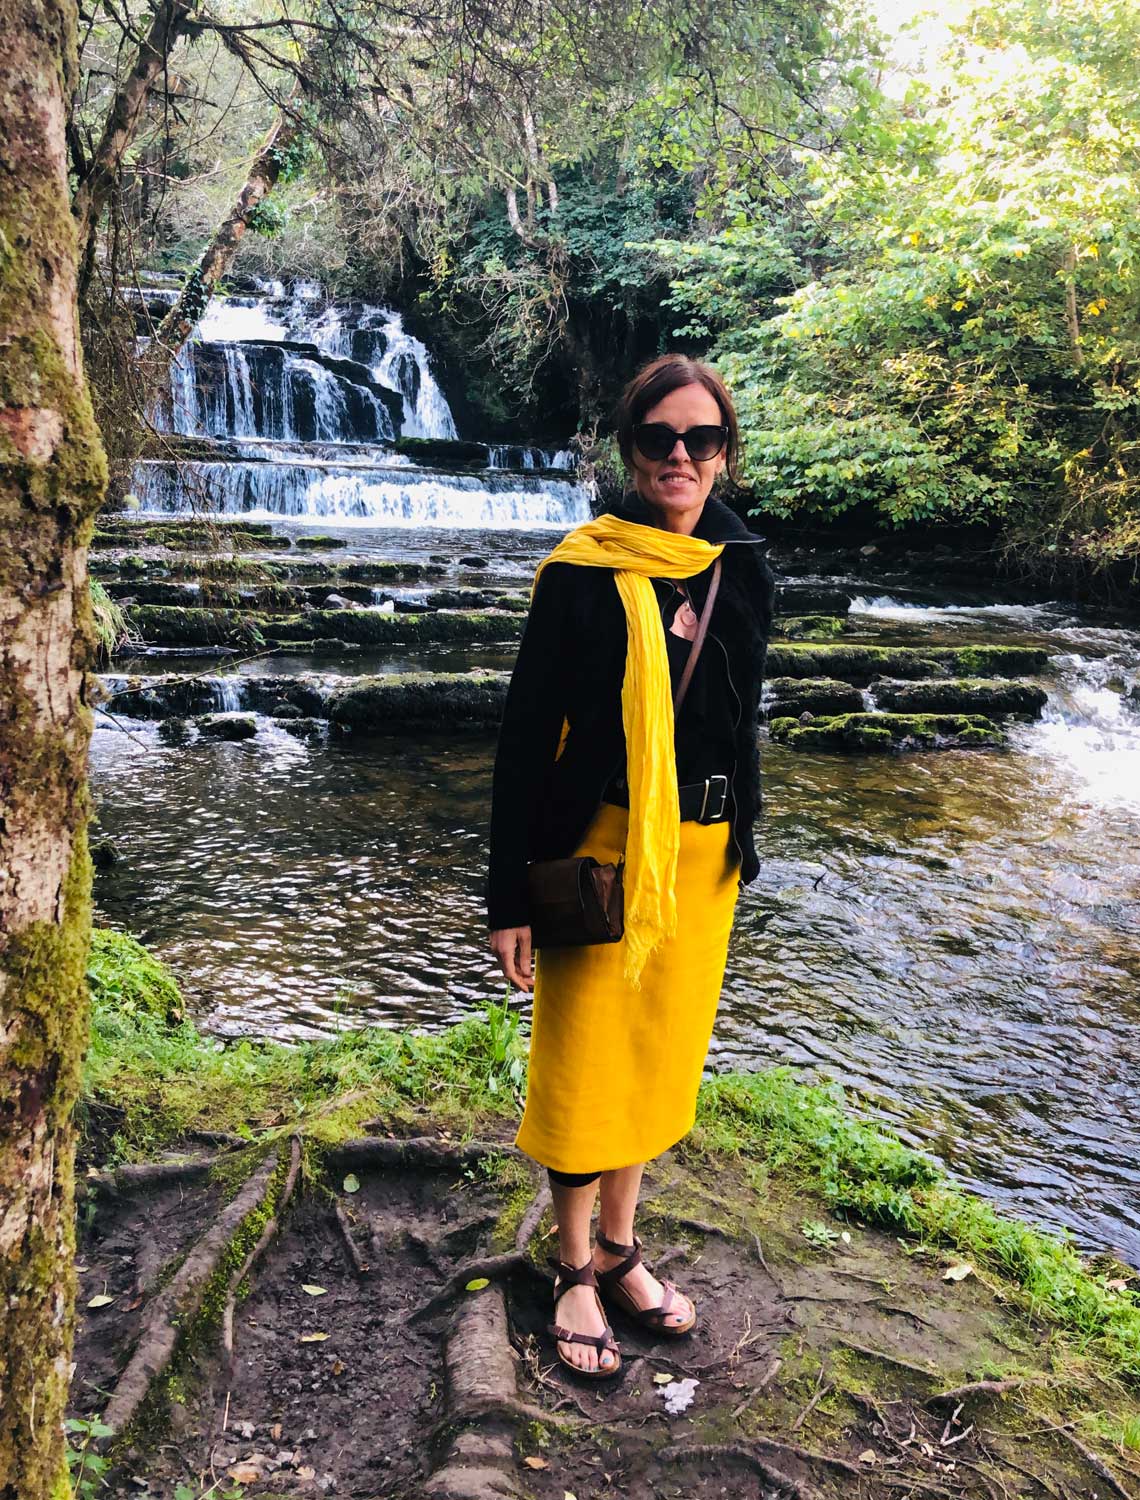 Finola in a wooded area surrounded by nature and standing in front of a waterfall